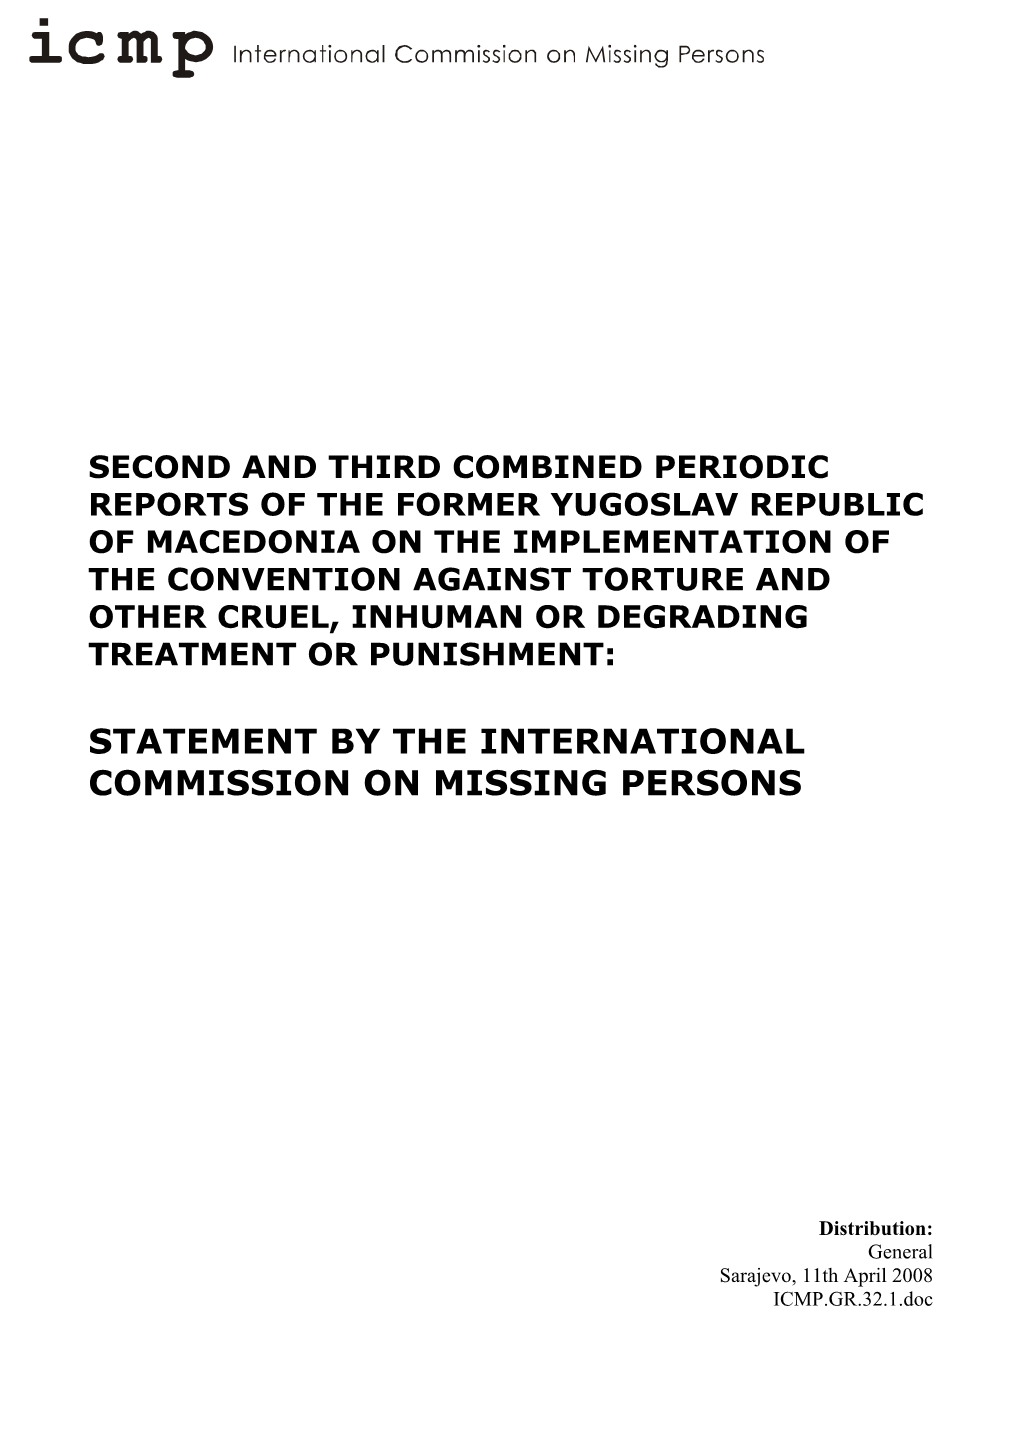 Statement by the International Commission on Missing Persons